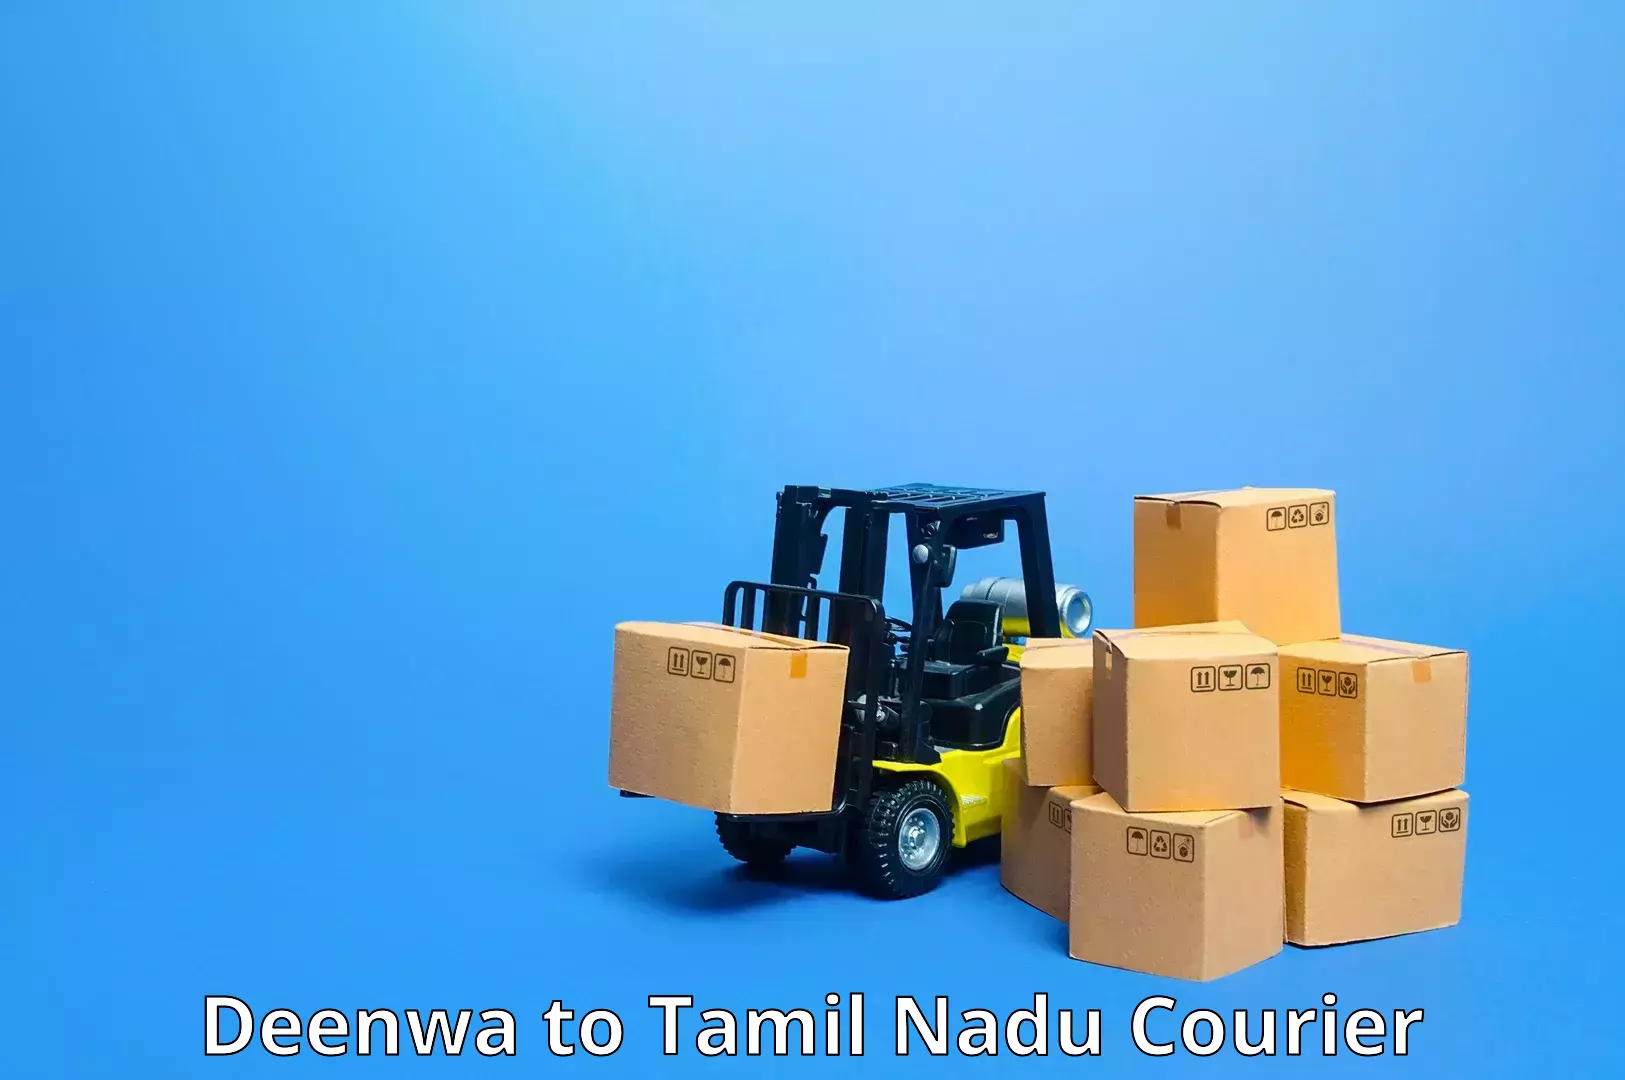 Global courier networks Deenwa to Tamil Nadu